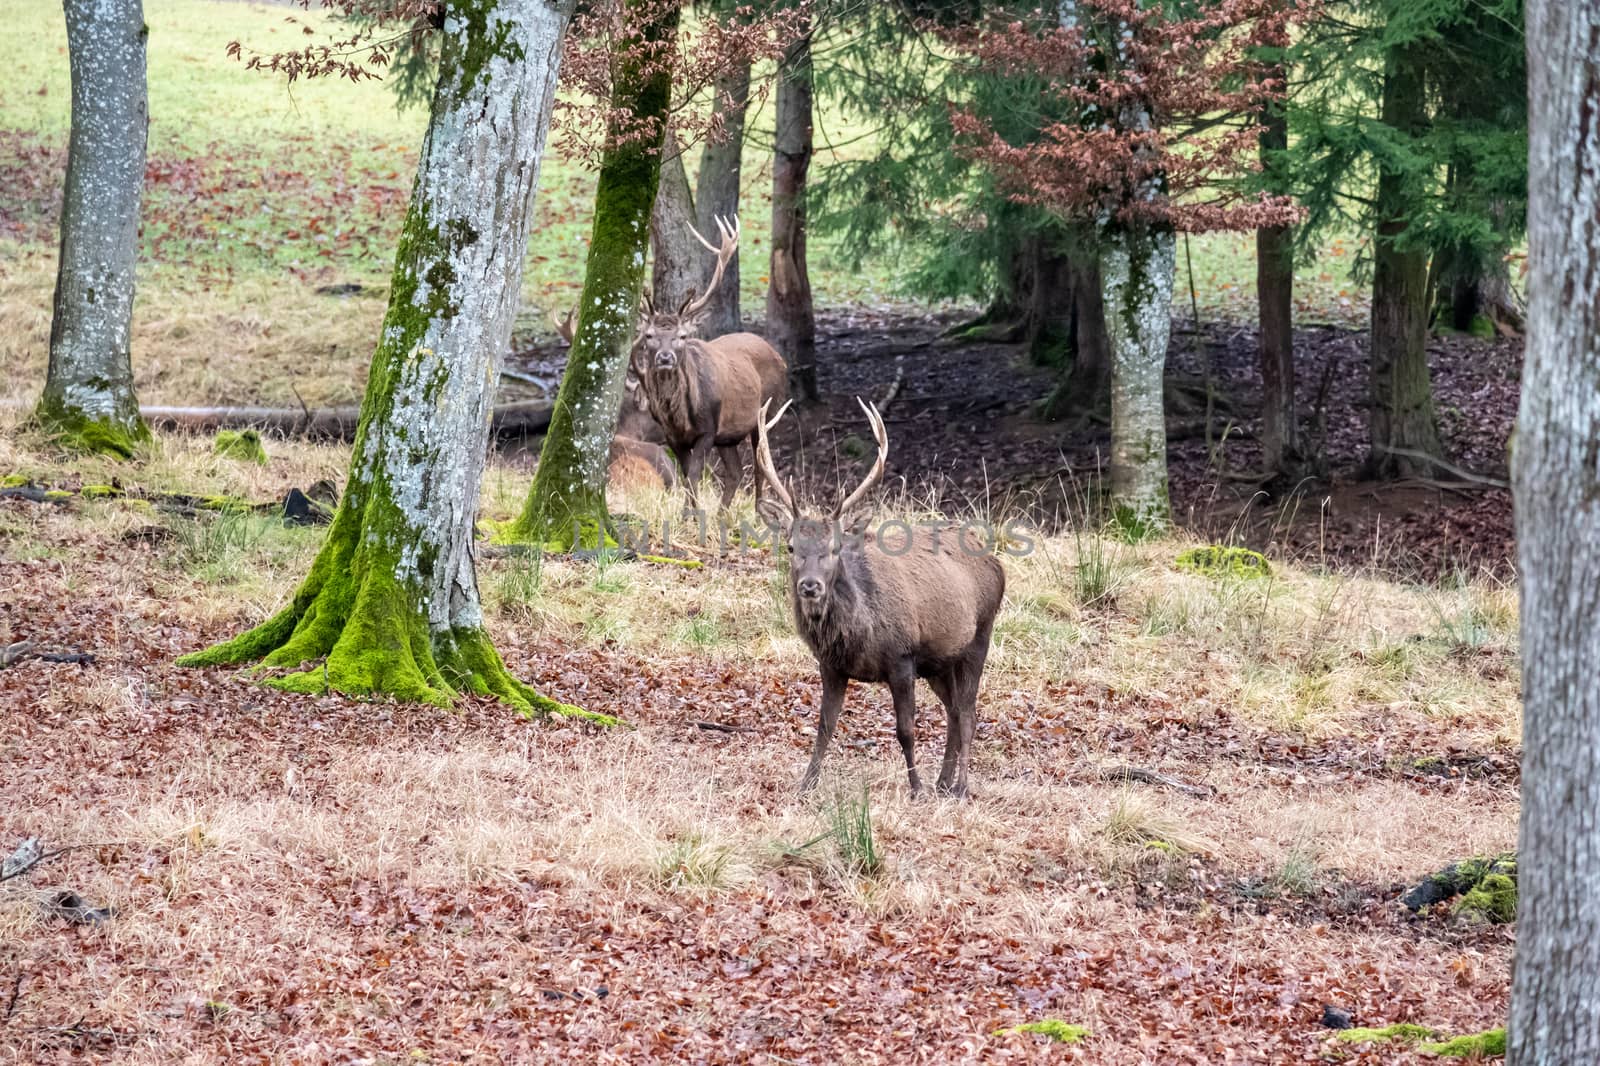 An image of a stag in the forest